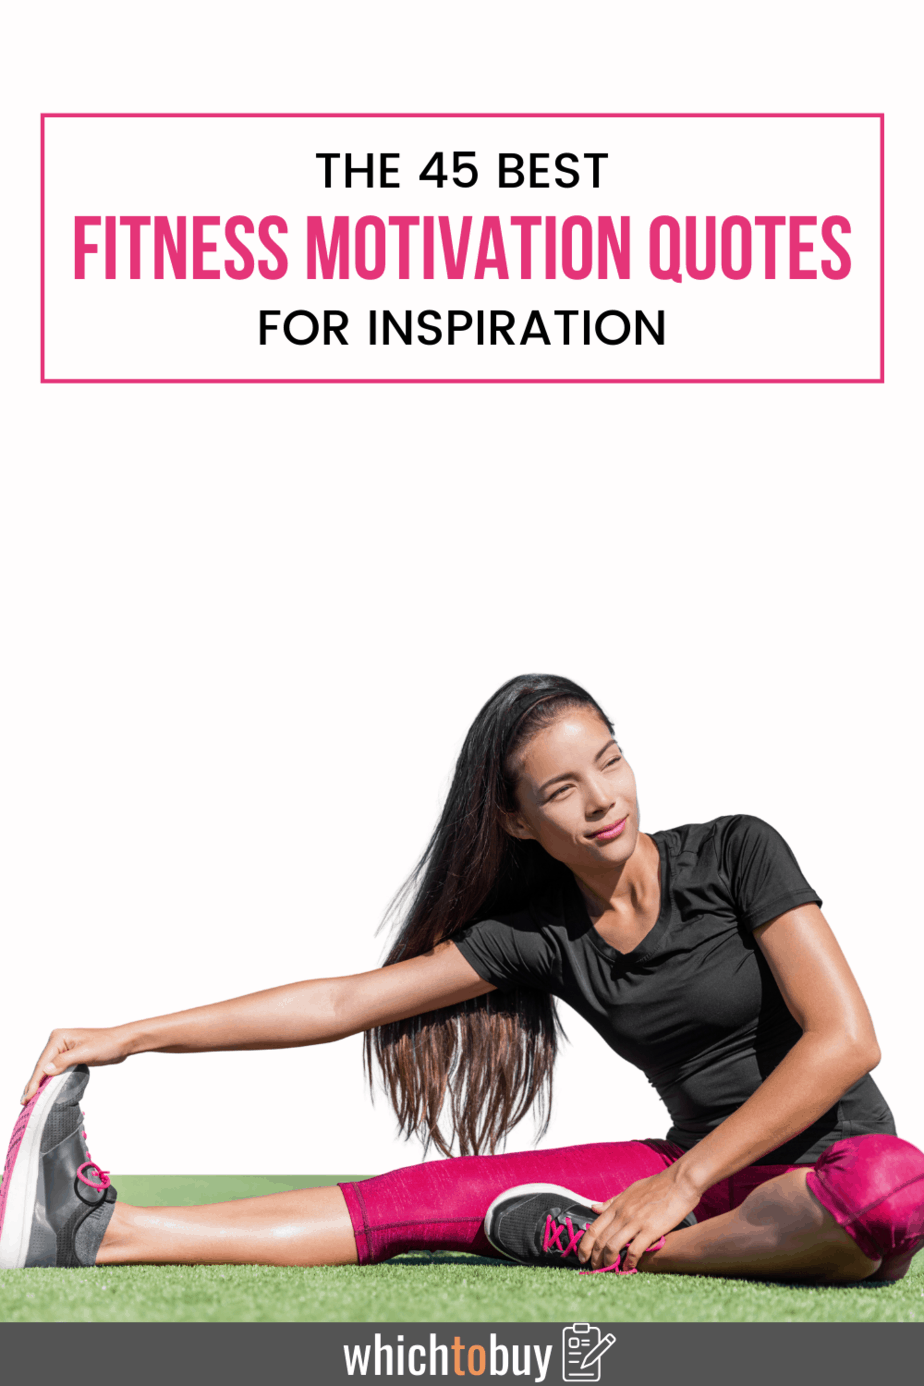 The 45 Best Fitness Motivation Quotes for Inspiration | Which to buy?